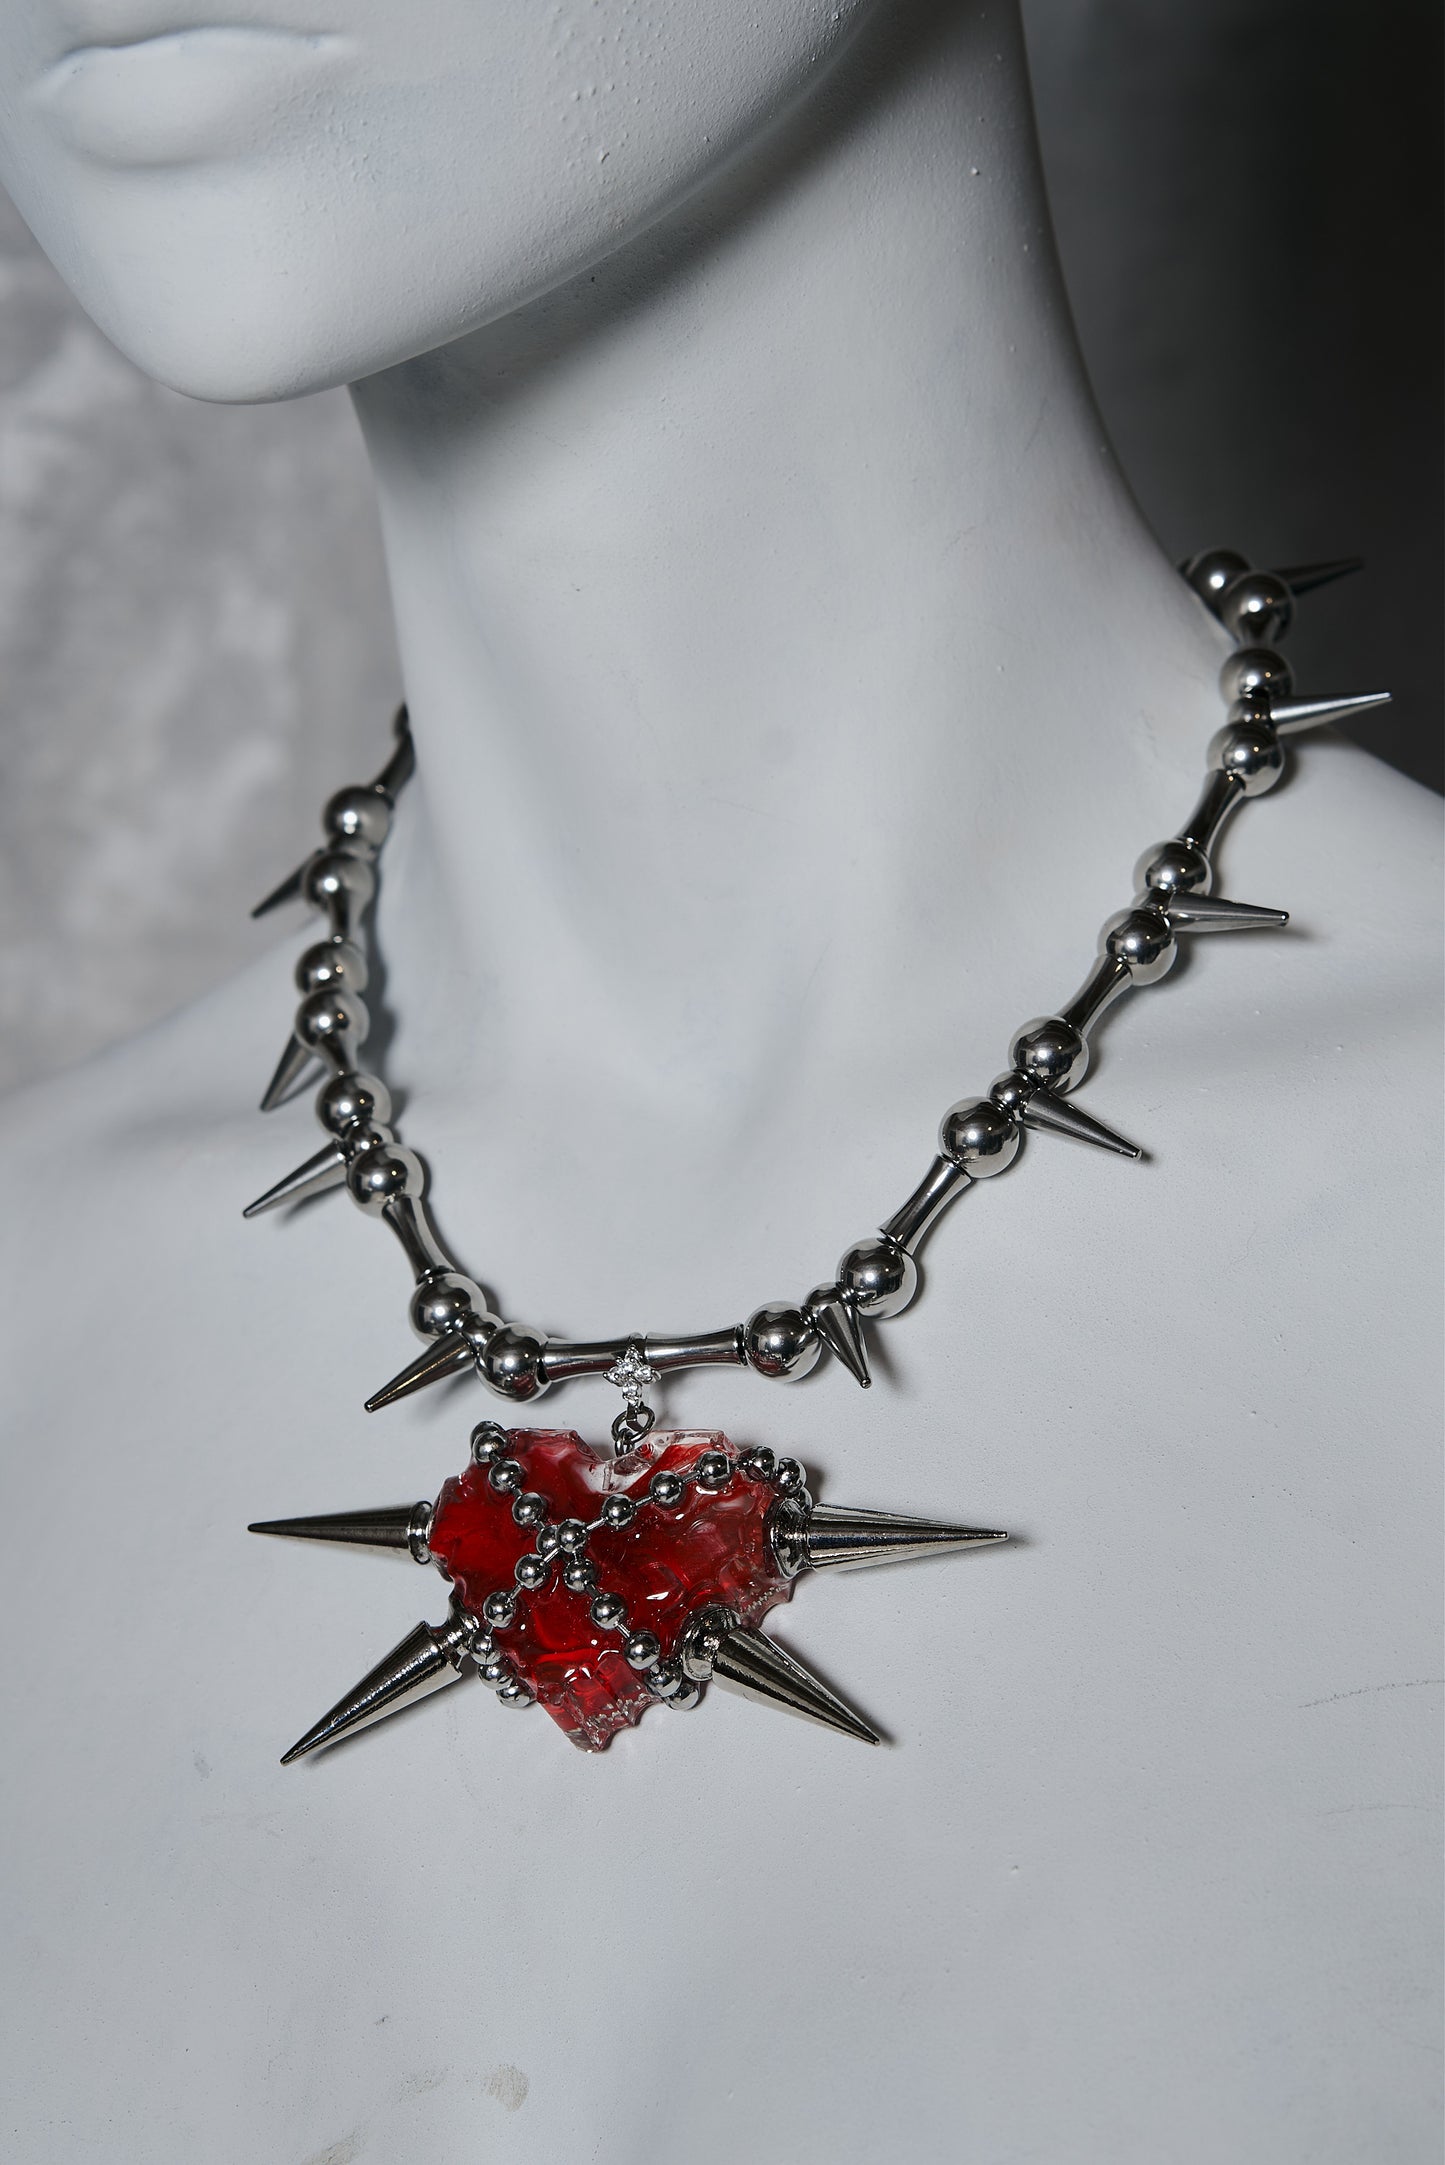 666999 Hardcore heart spiked necklace #2583